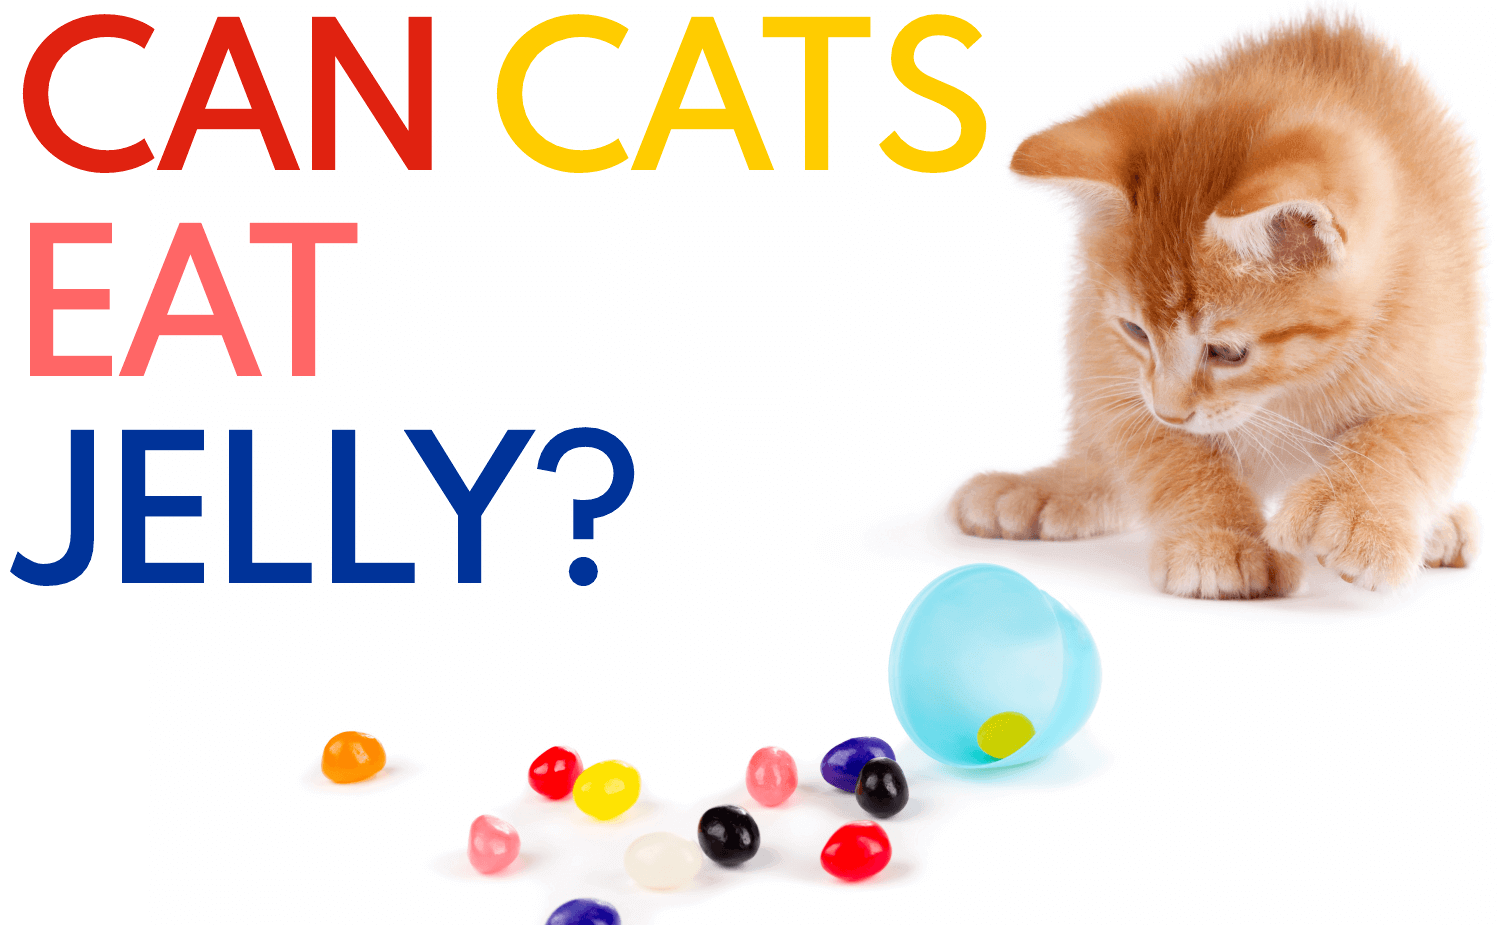 can cats eat jelly